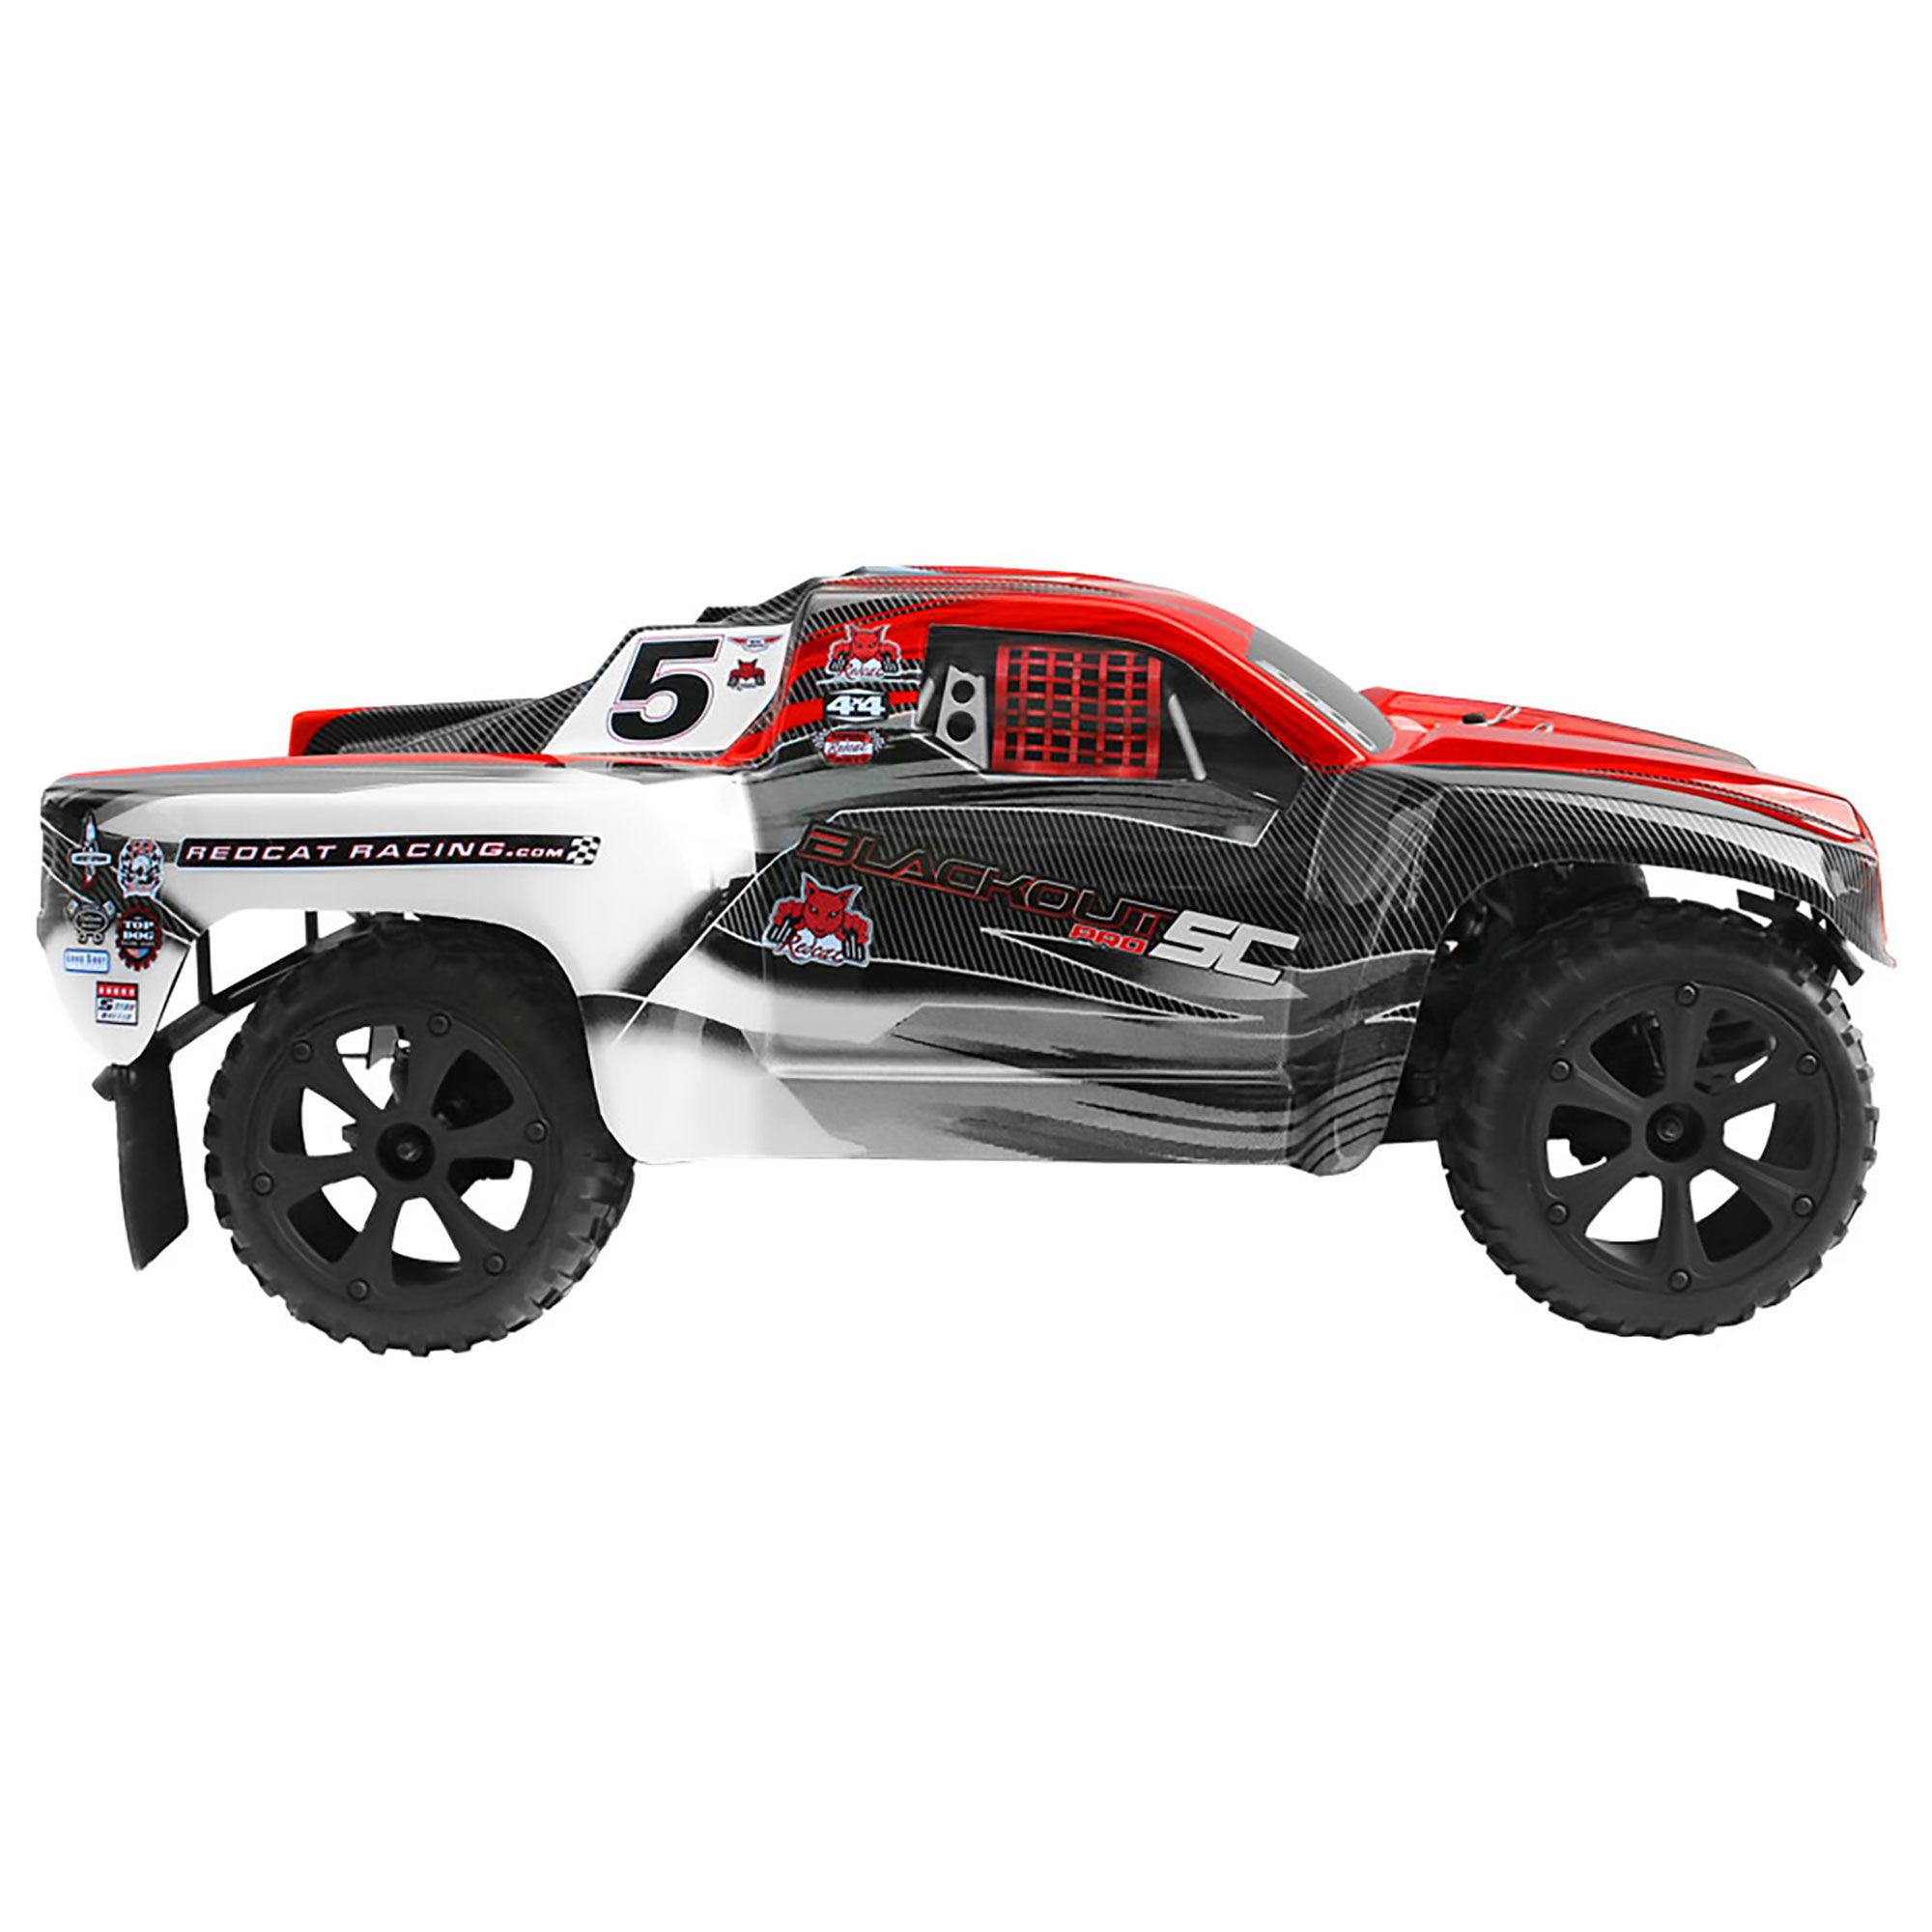 Redcat Racing Blackout SC Pro 1/10 Brushless Electric Short Course RC Truck Red 